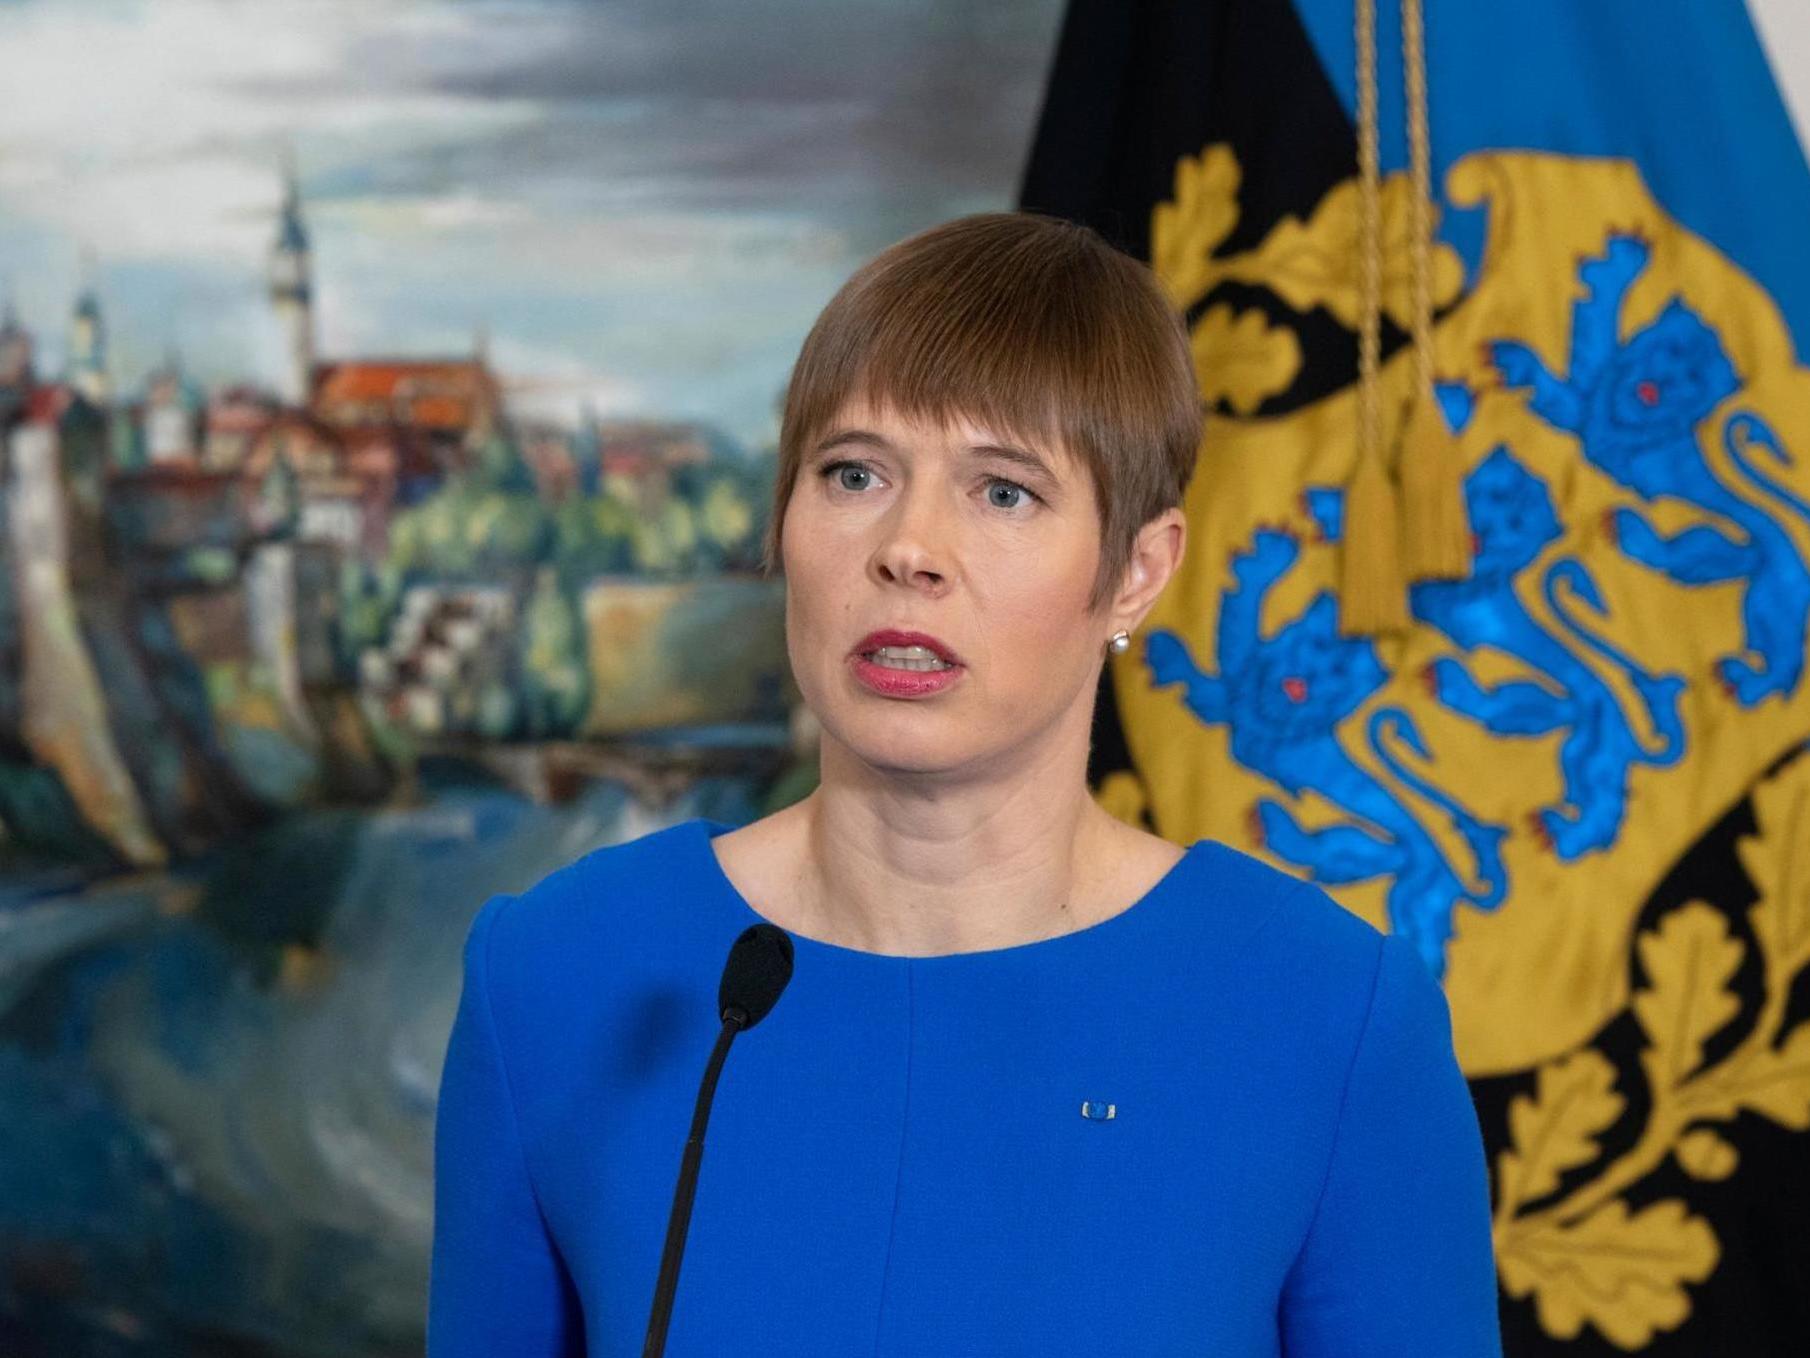 Ms Kaljulaid left a Monday swearing-in ceremony for a new three-party government when it was time for the appointee from Mr Helme’s far right party who has been accused of domestic violence to take the oath of office